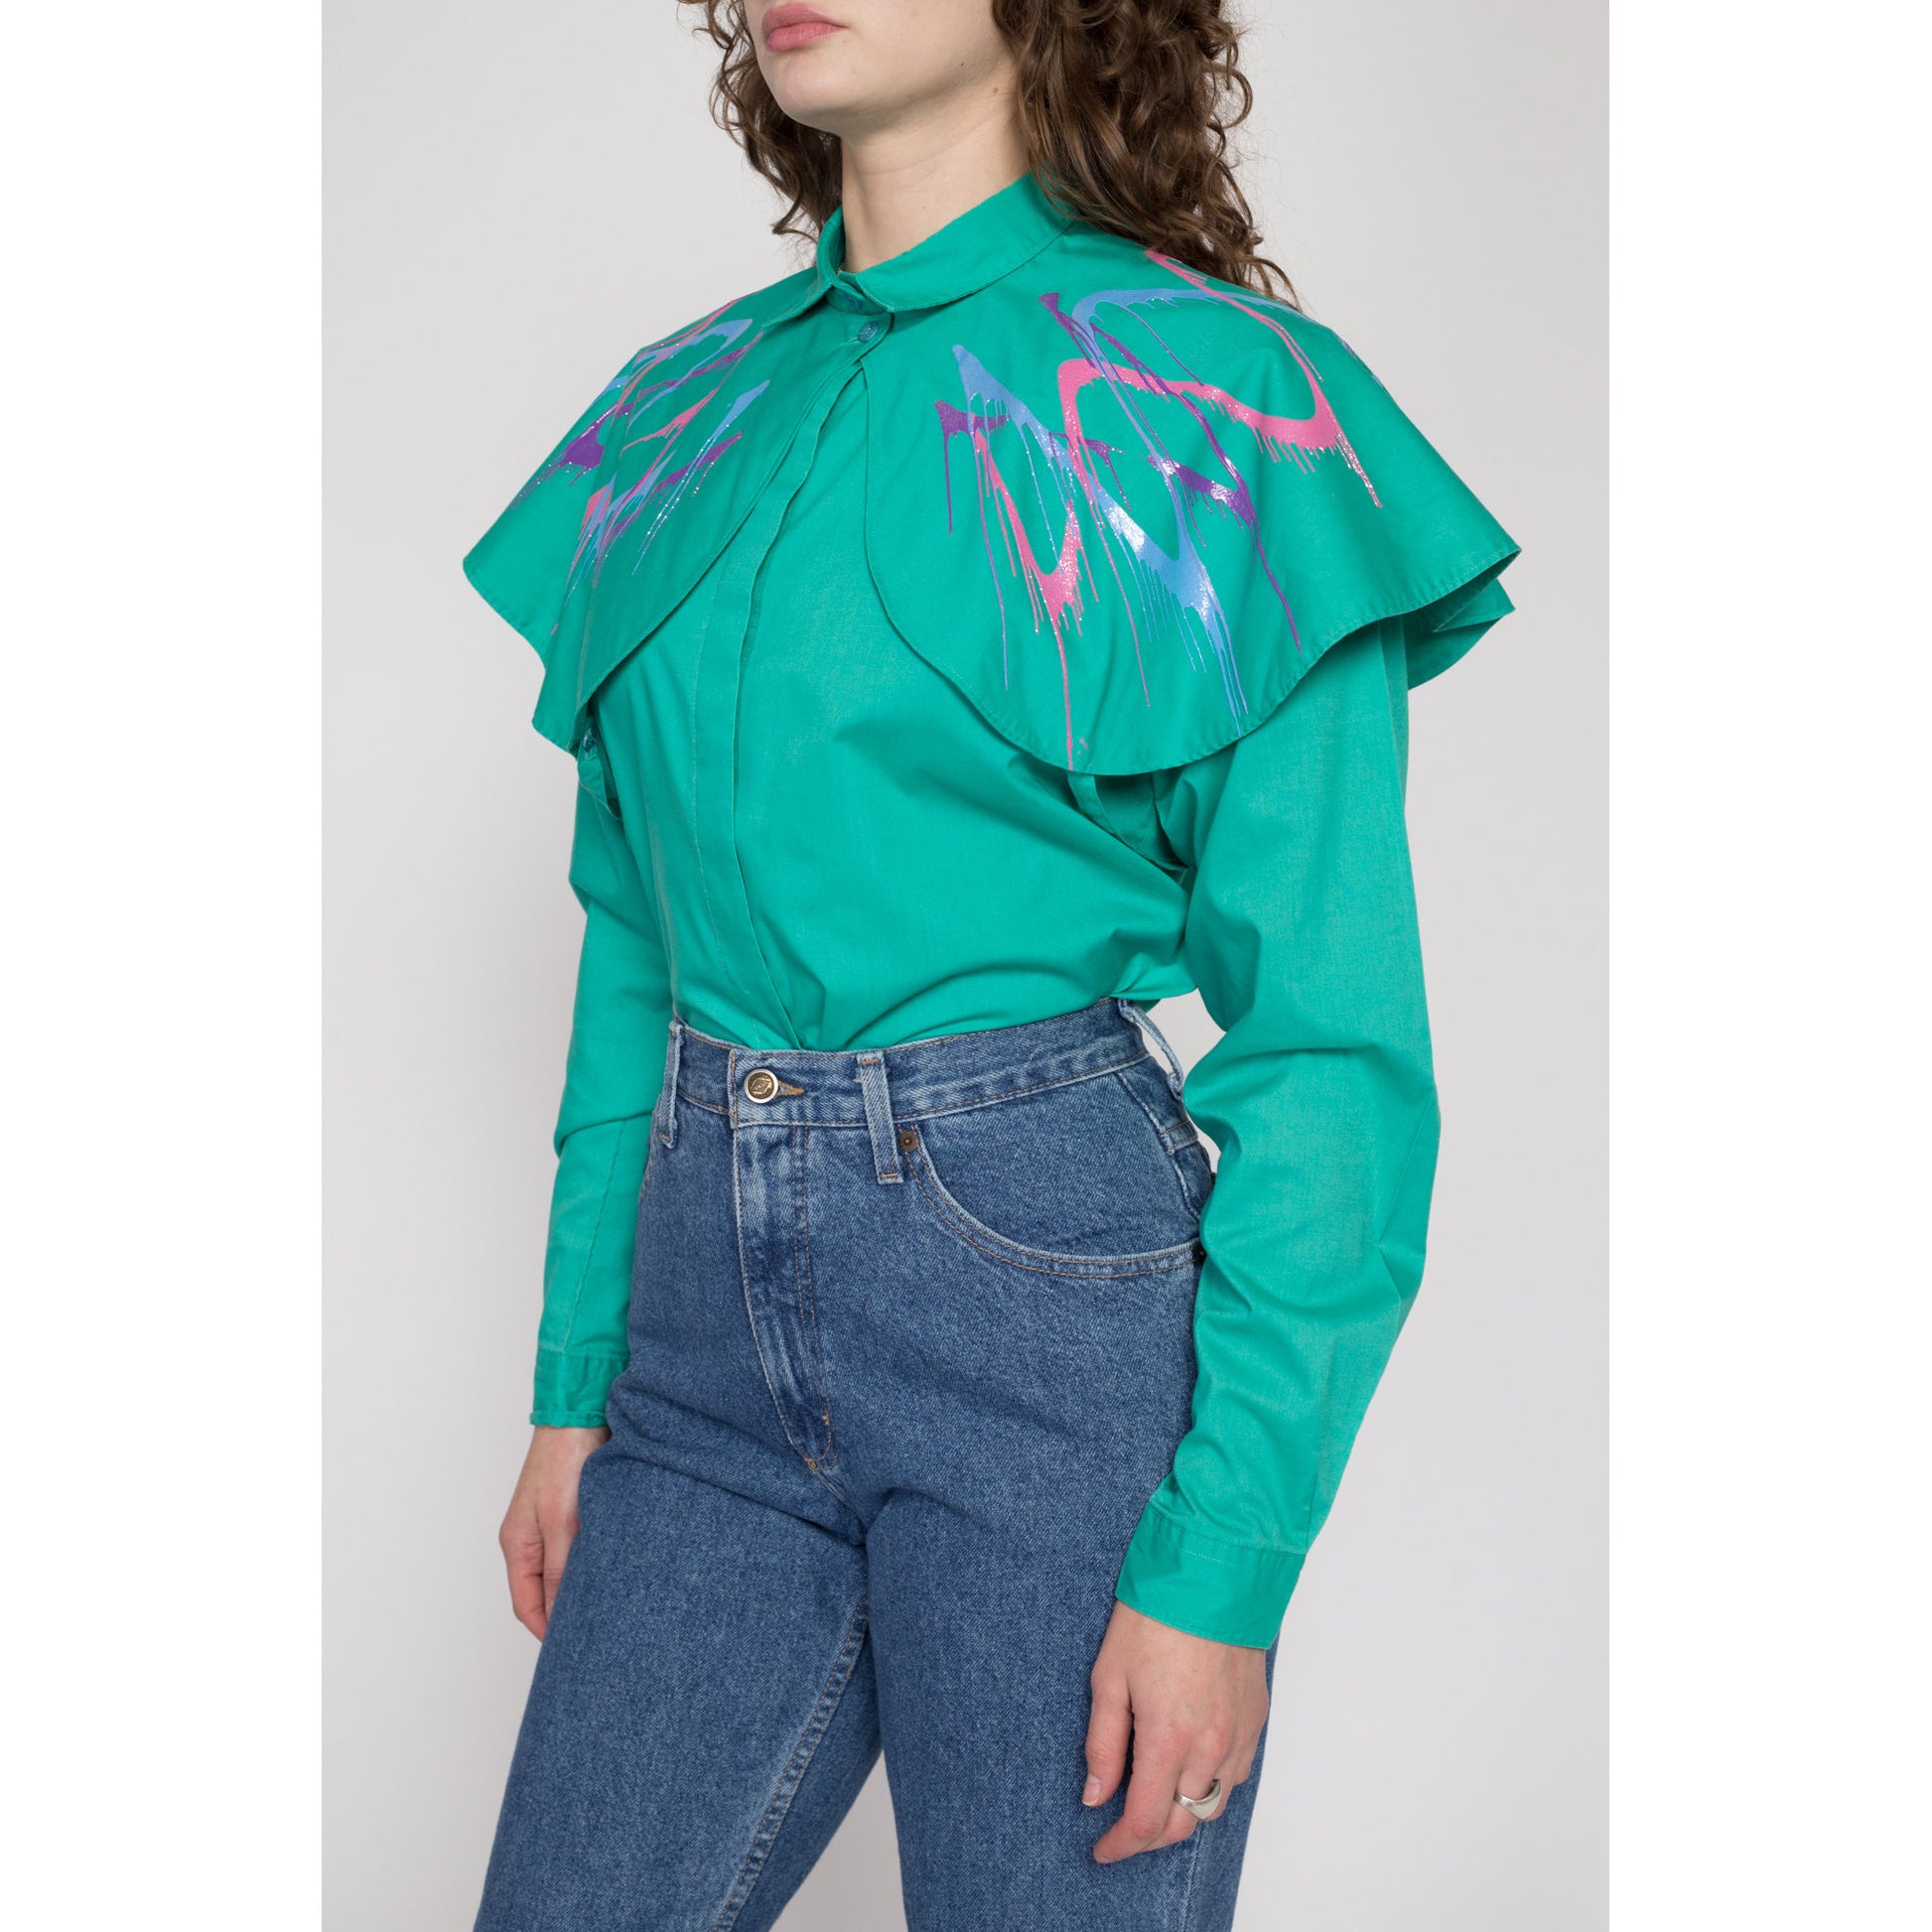 Medium 80s Teal Cameo Rose Western Capelet Shirt | Vintage Paint Splatter Graphic Collared Cape Top